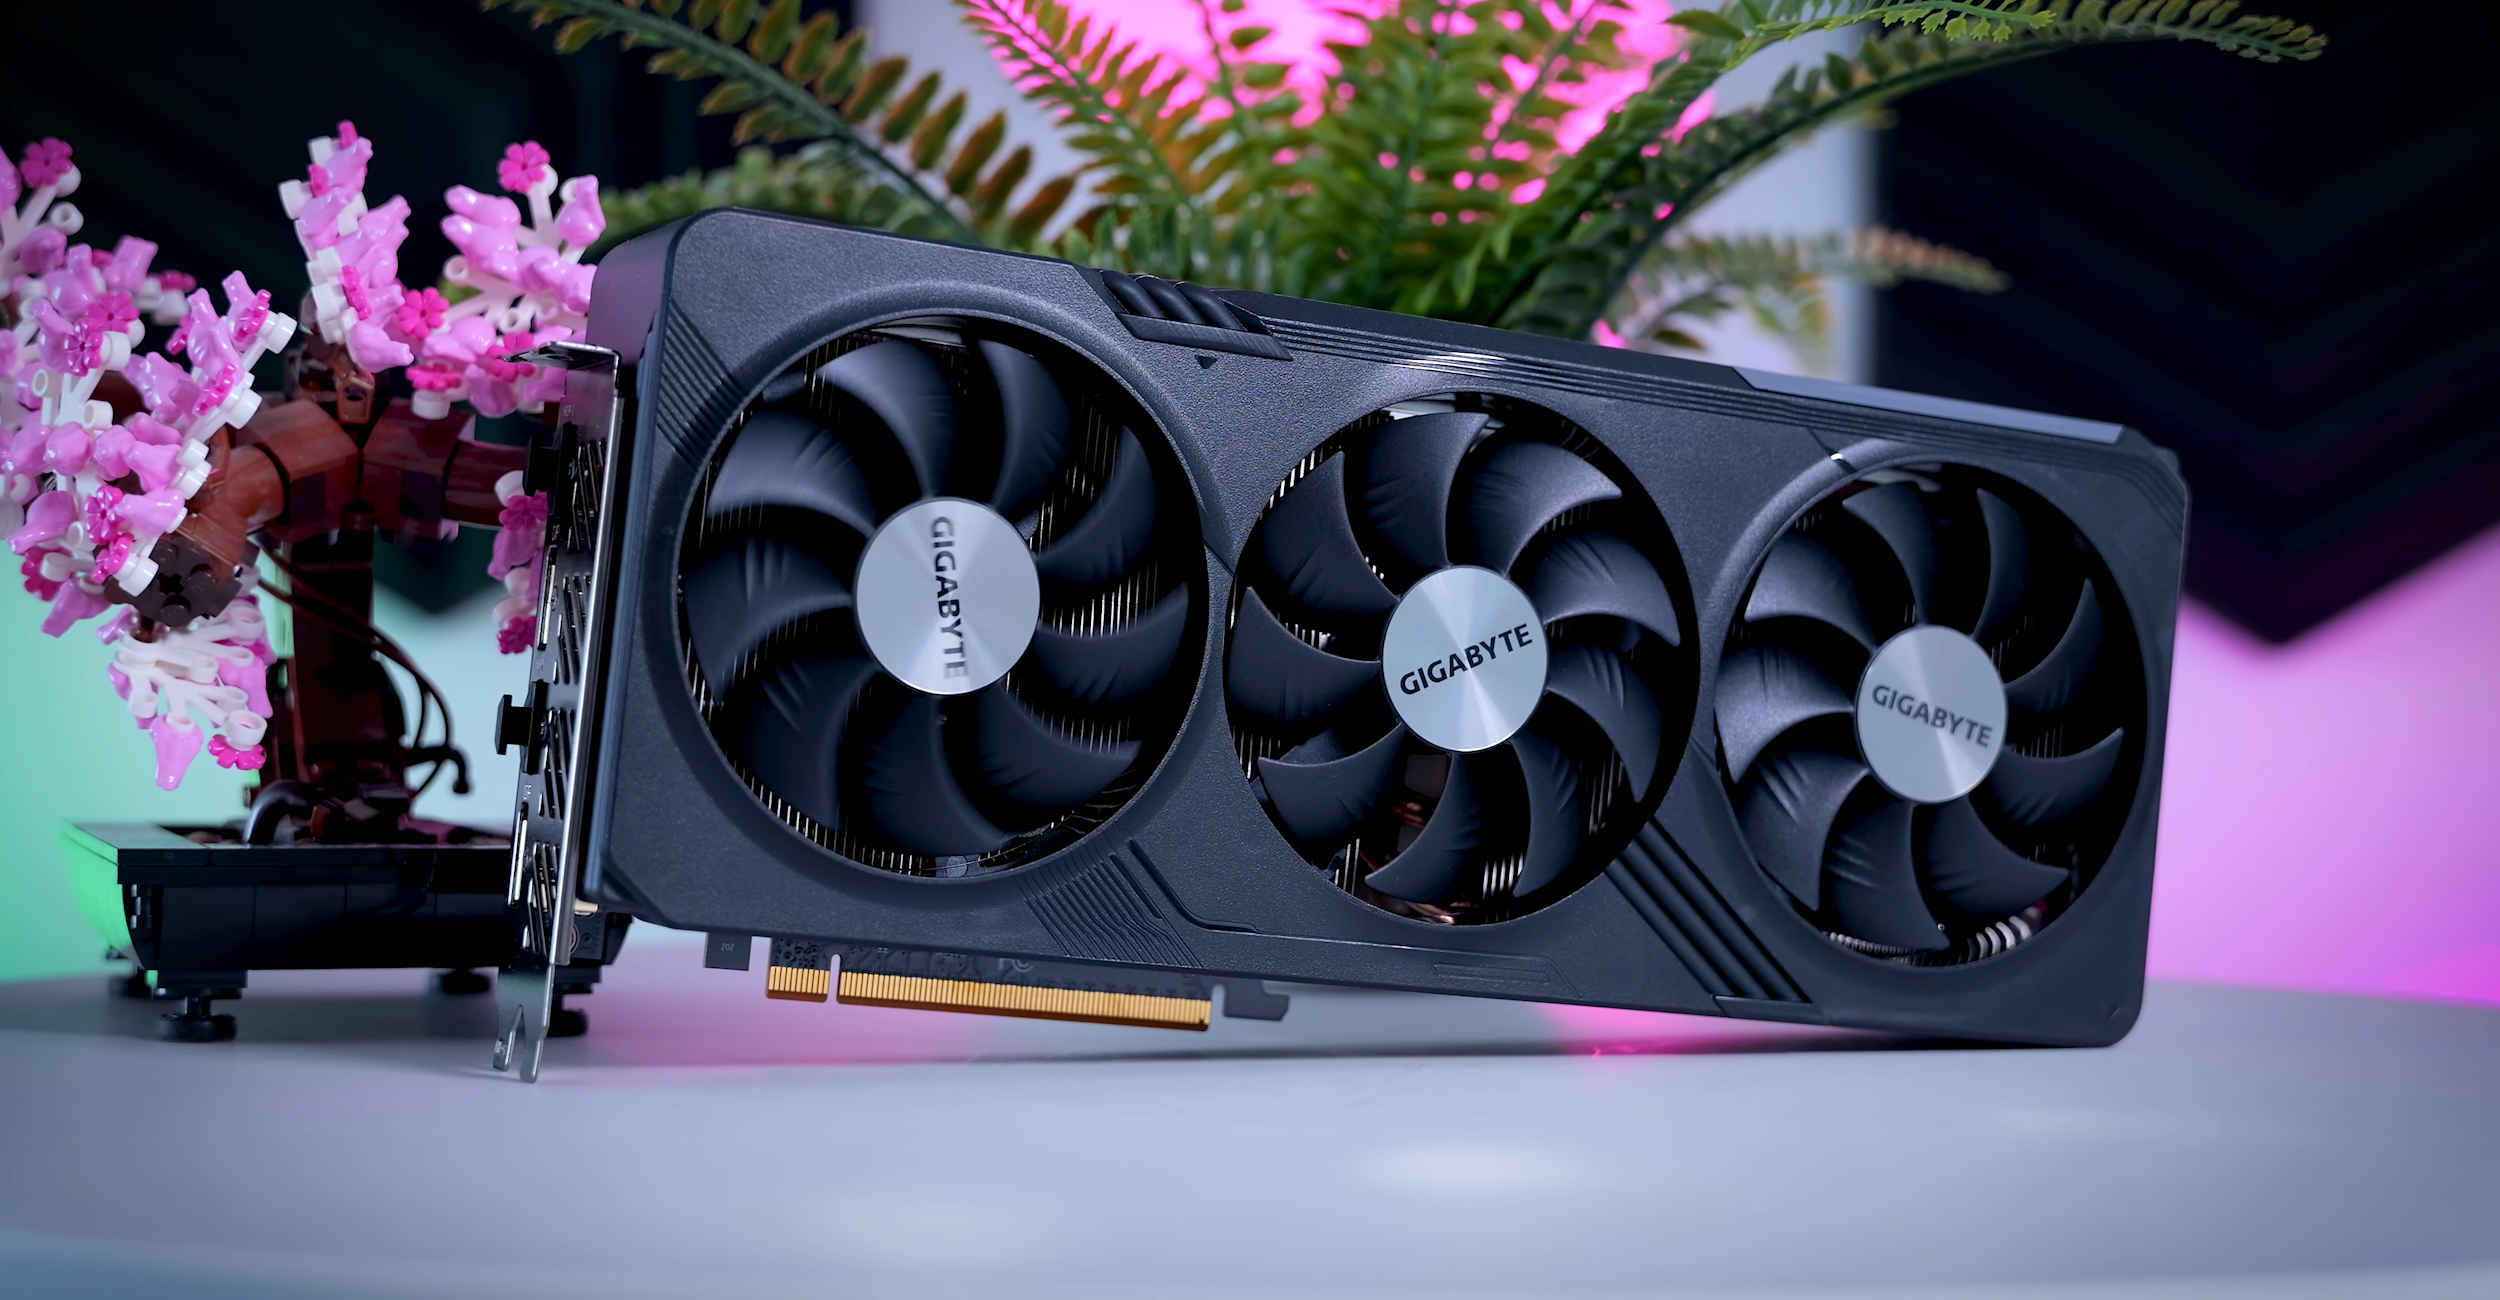 Simulated RX 7800 XT outperforms RTX 4070 by up to 14% at 4K in gaming  tests of the Radeon Pro W7800 -  News